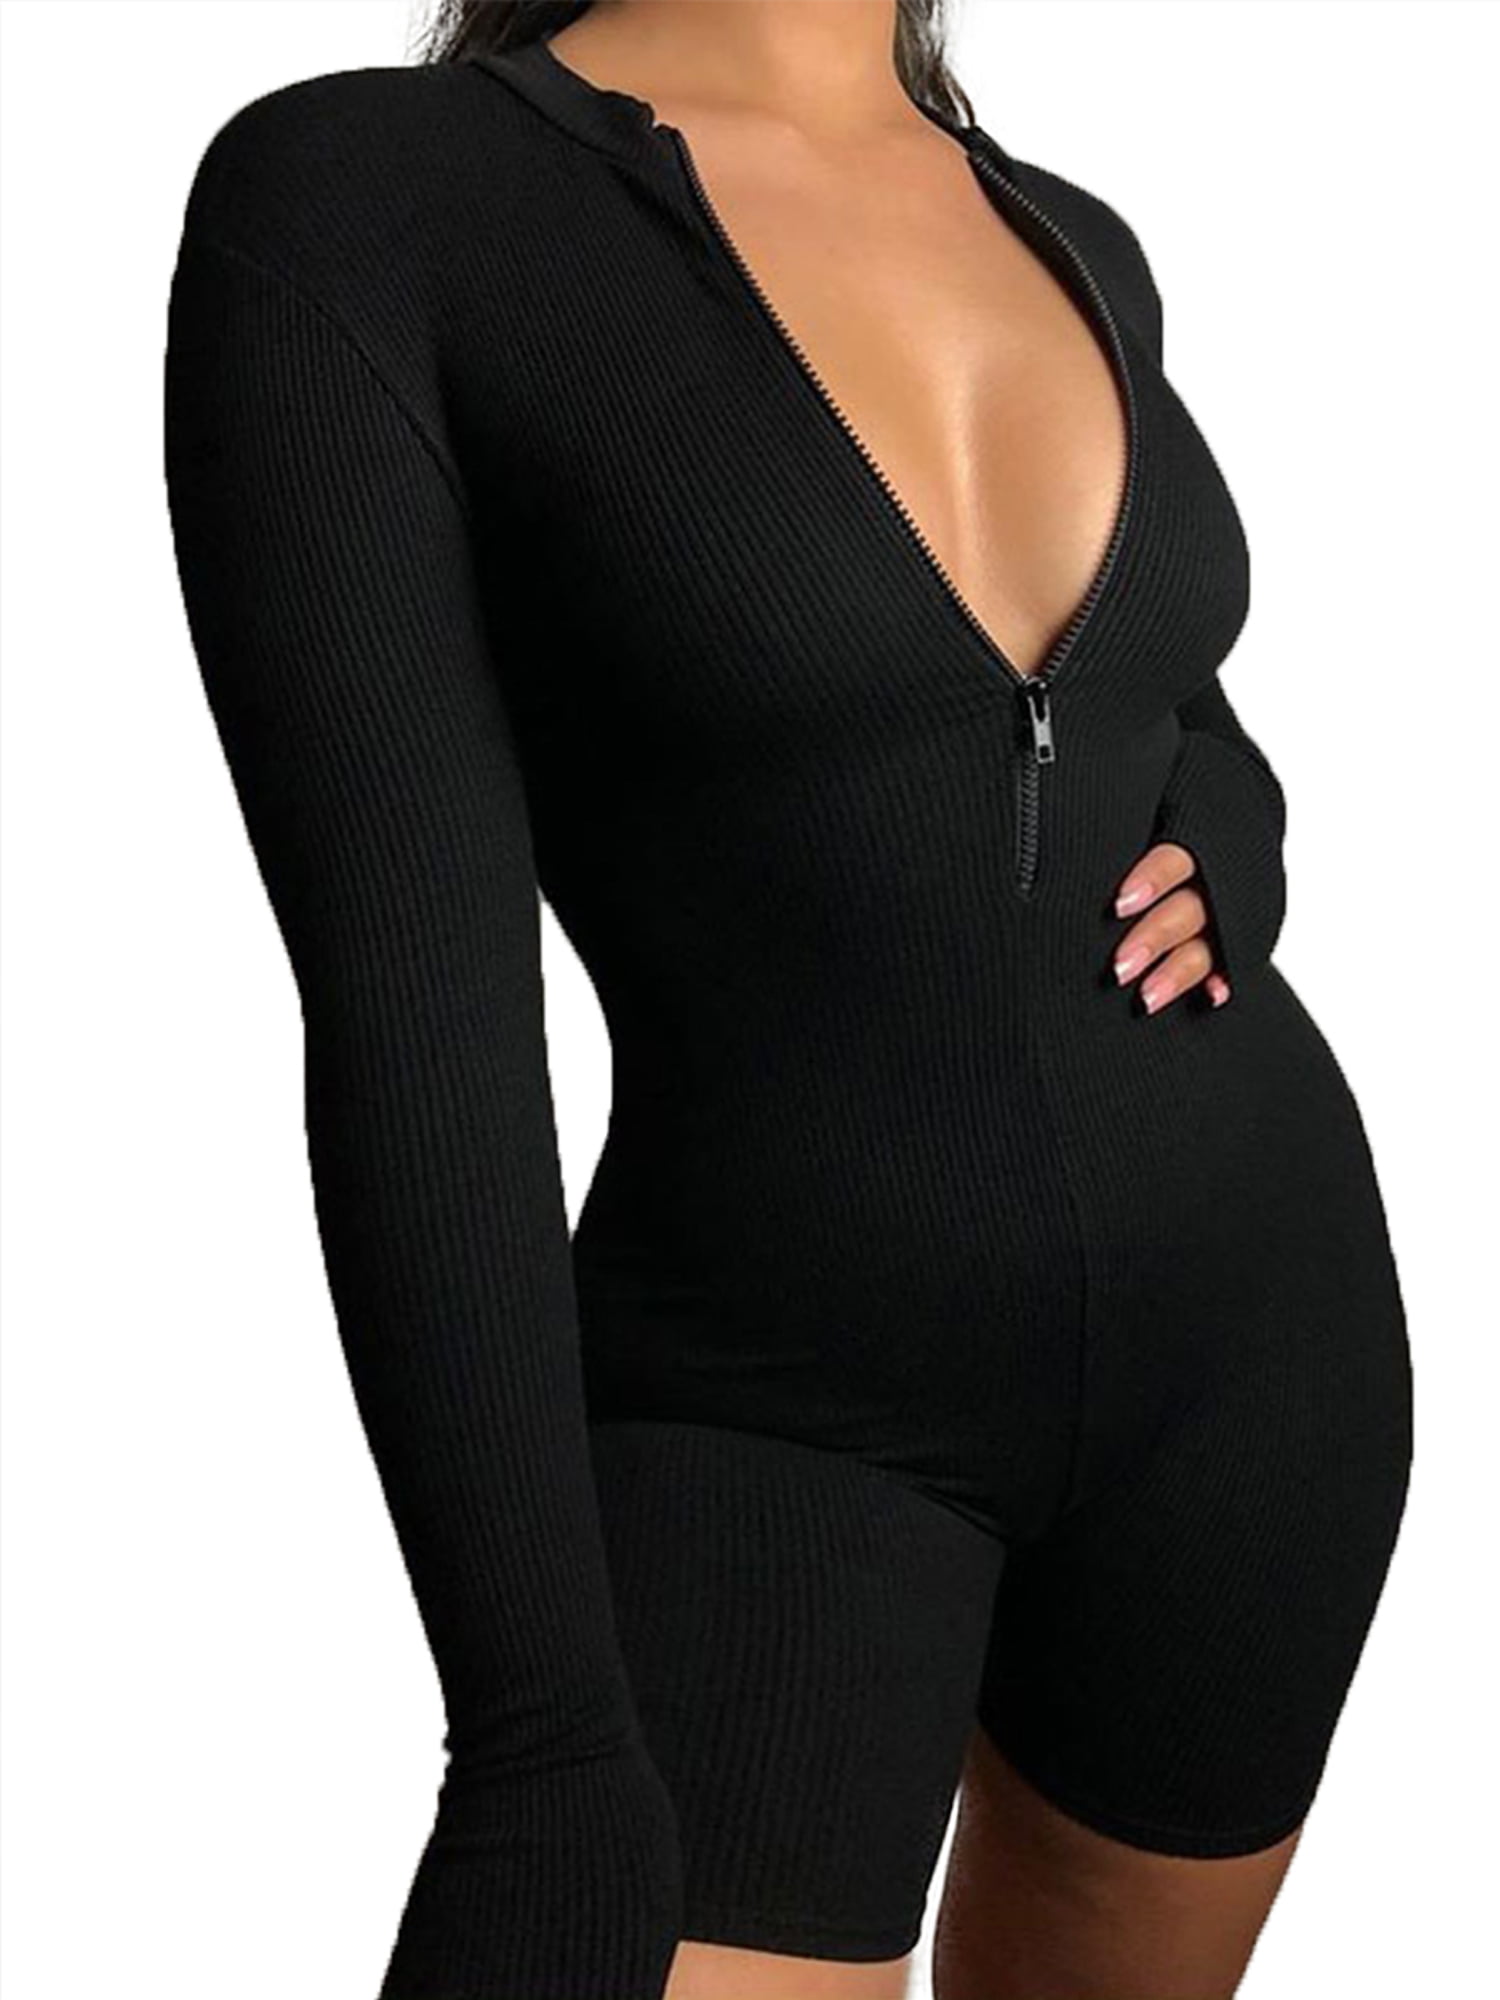 Color : Black, Size : M YAXAN Womens Long Sleeve Zipper Shorts Round Neck Bodysuit Bodycon Rompers Overall Jumpsuit